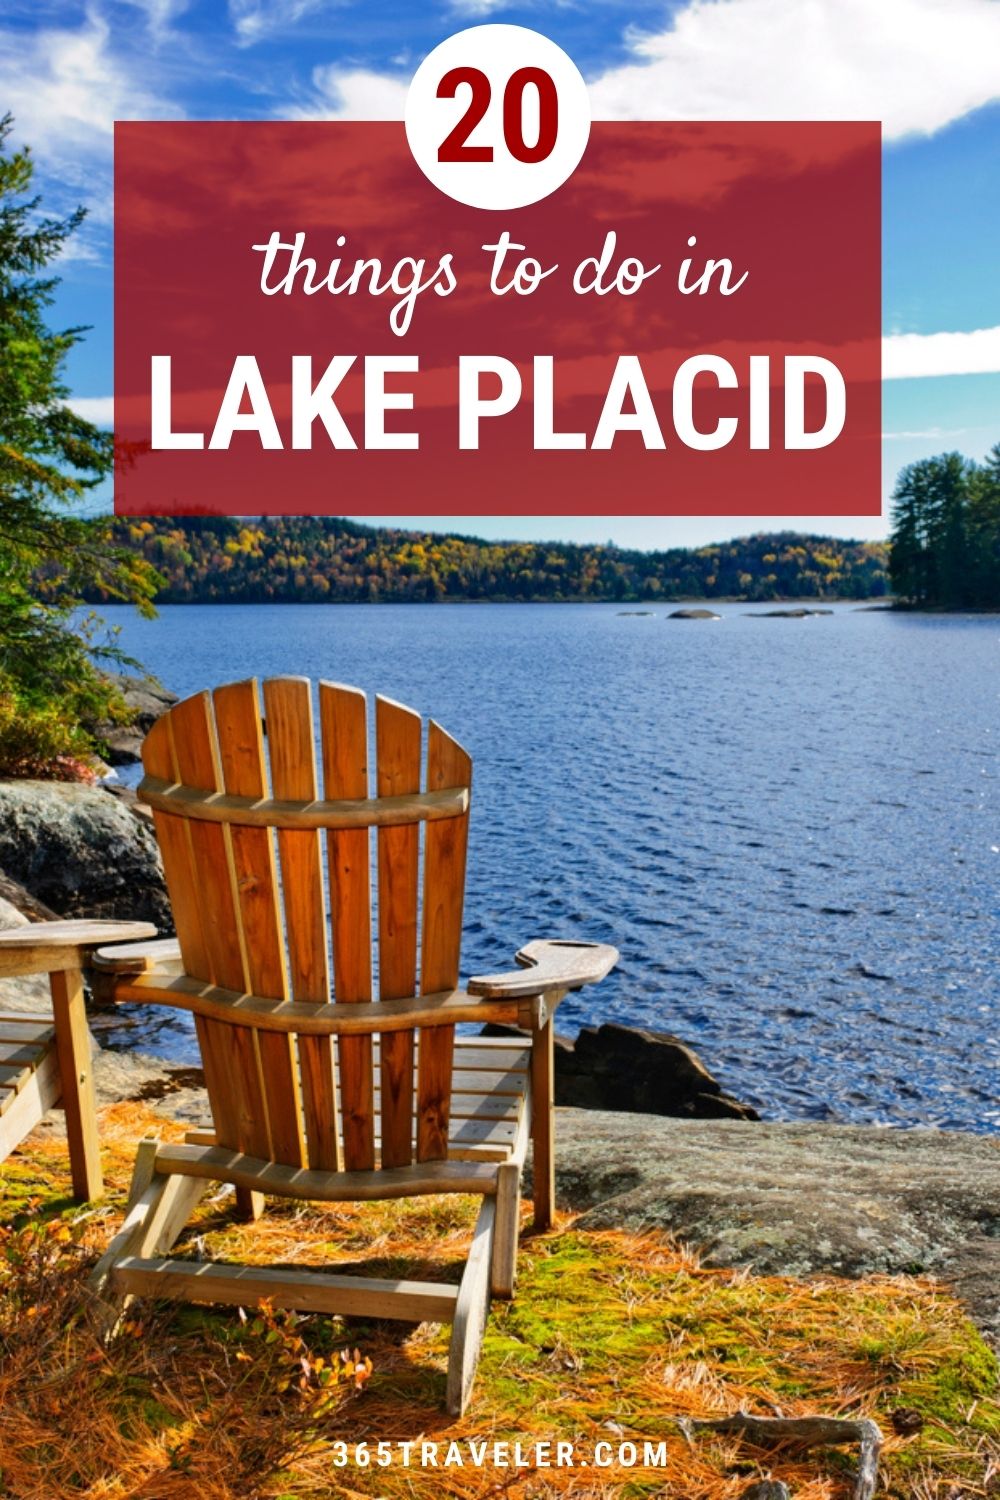 Olympic-Sized Fun: 20 Things To Do in Lake Placid